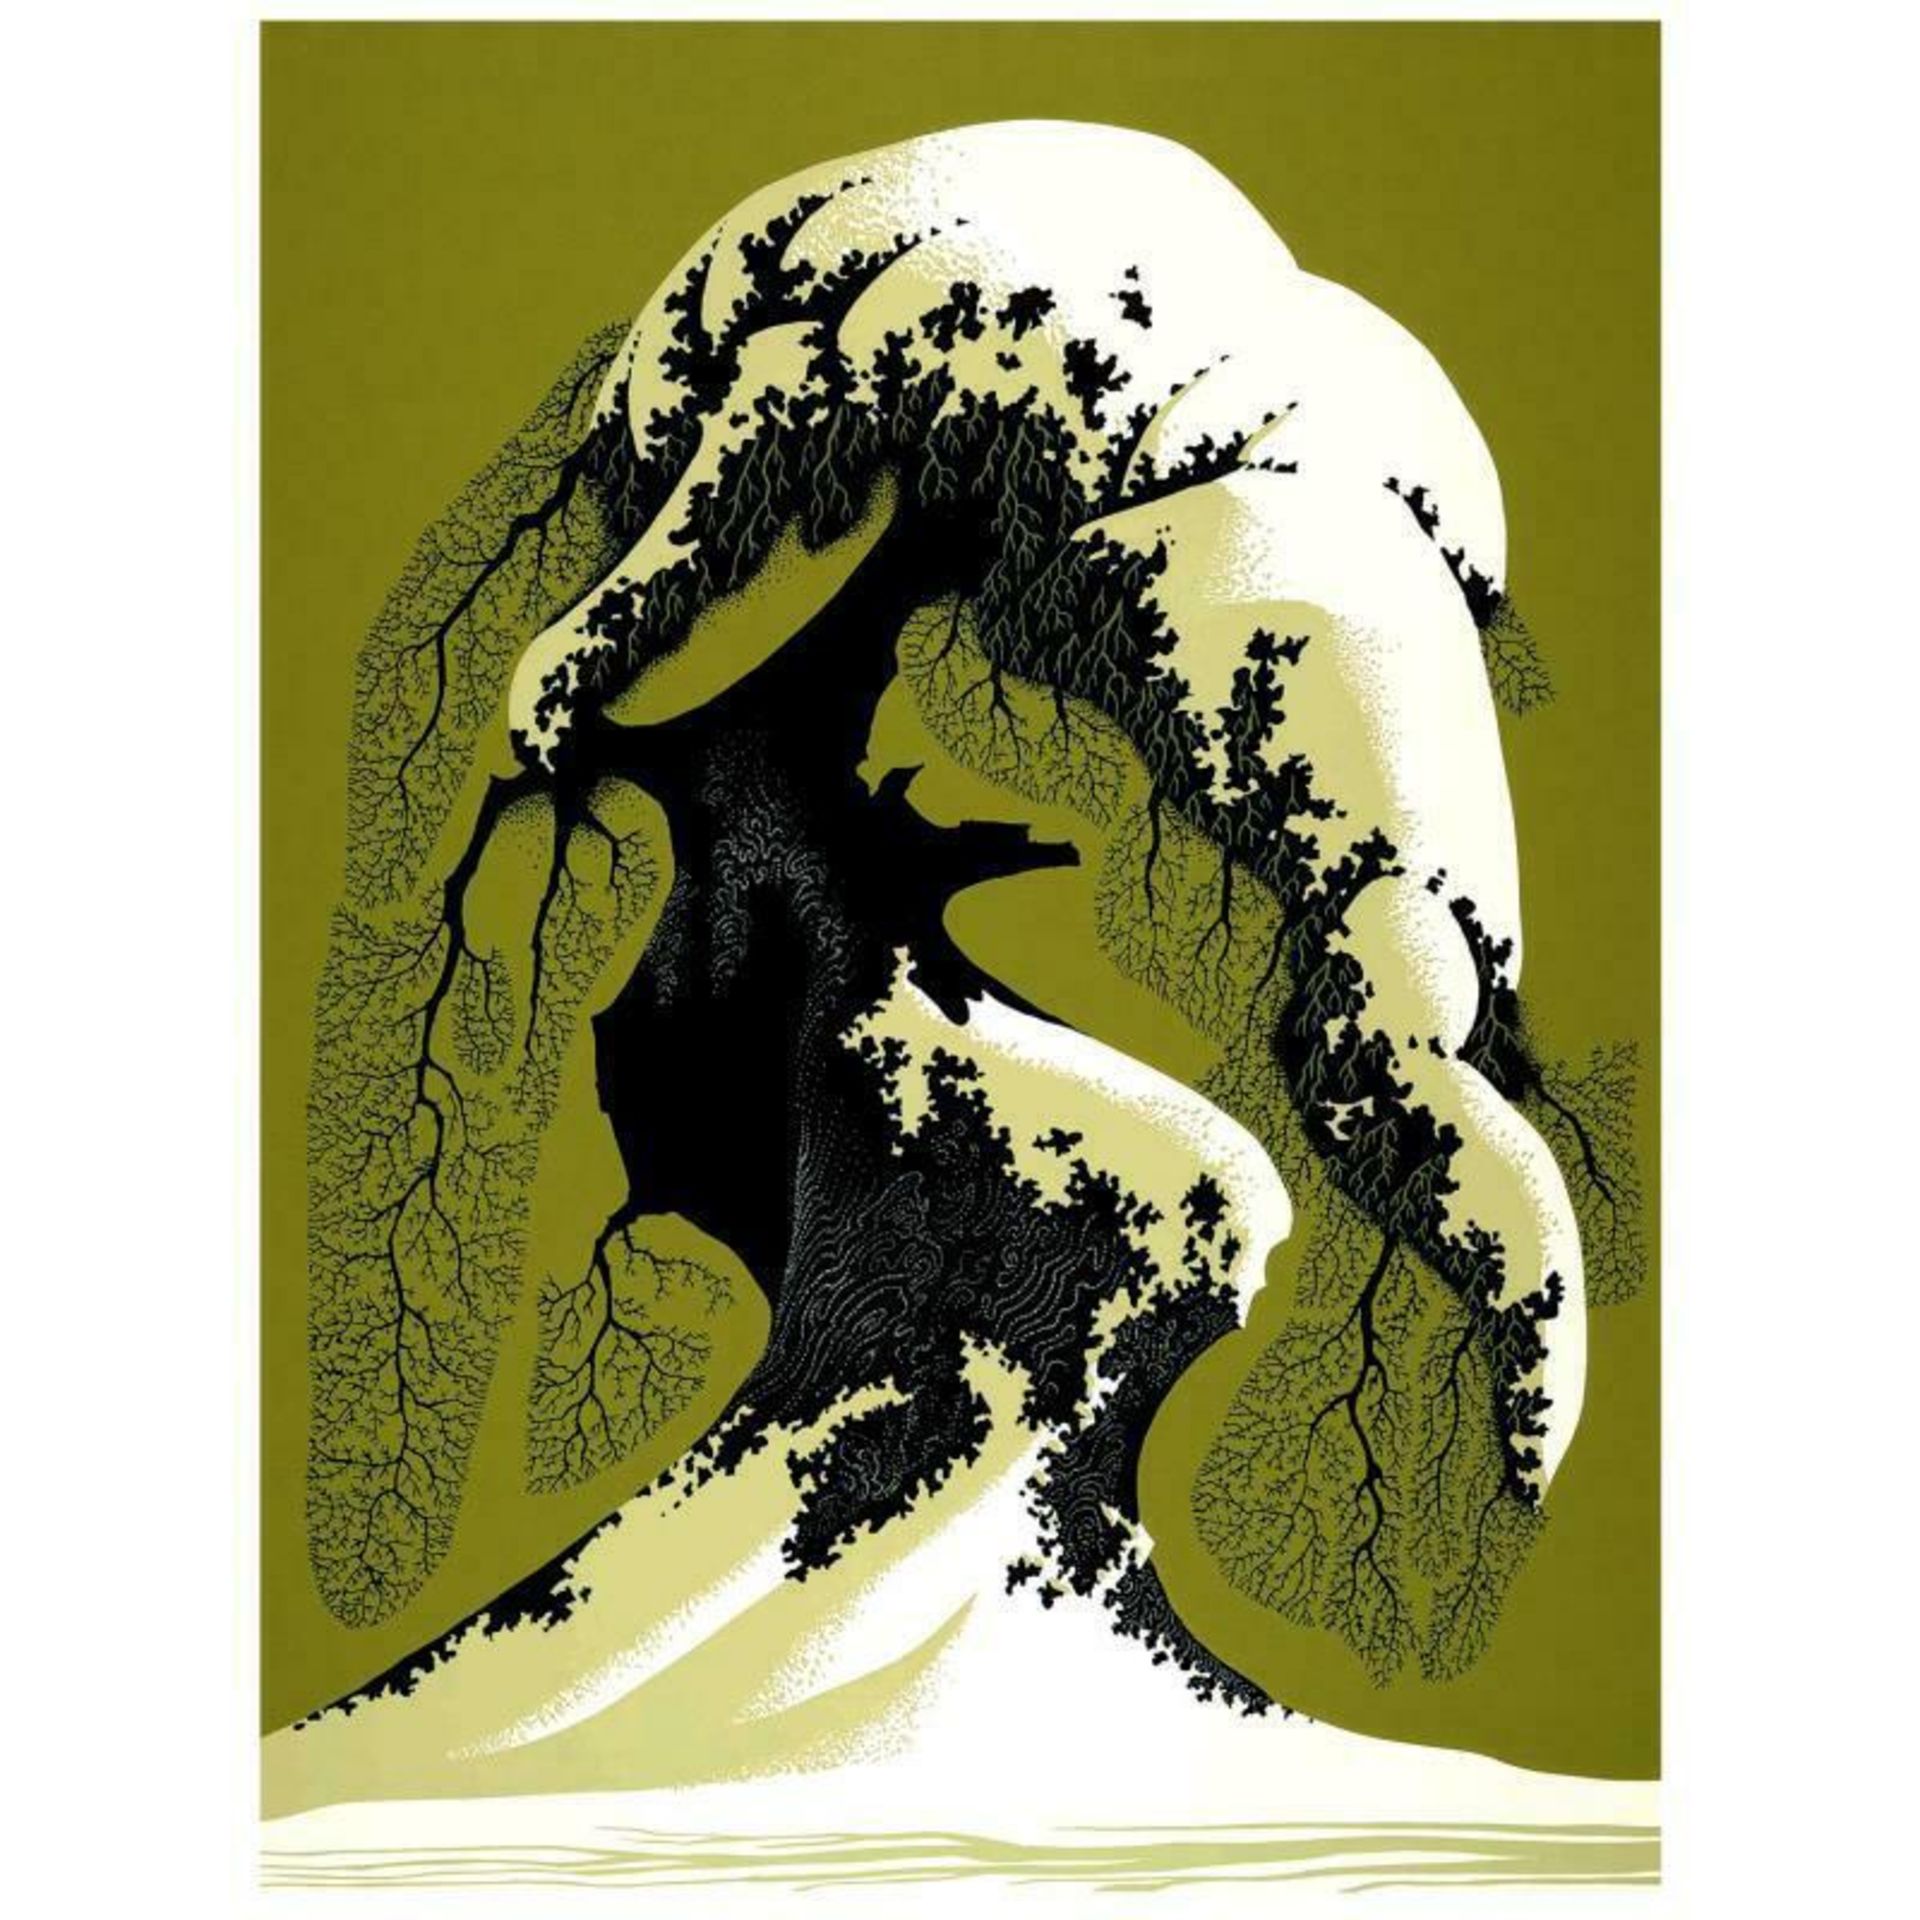 Eyvind Earle (1916-2000), "Snow Laden" Limited Edition Serigraph on Paper; Numbe